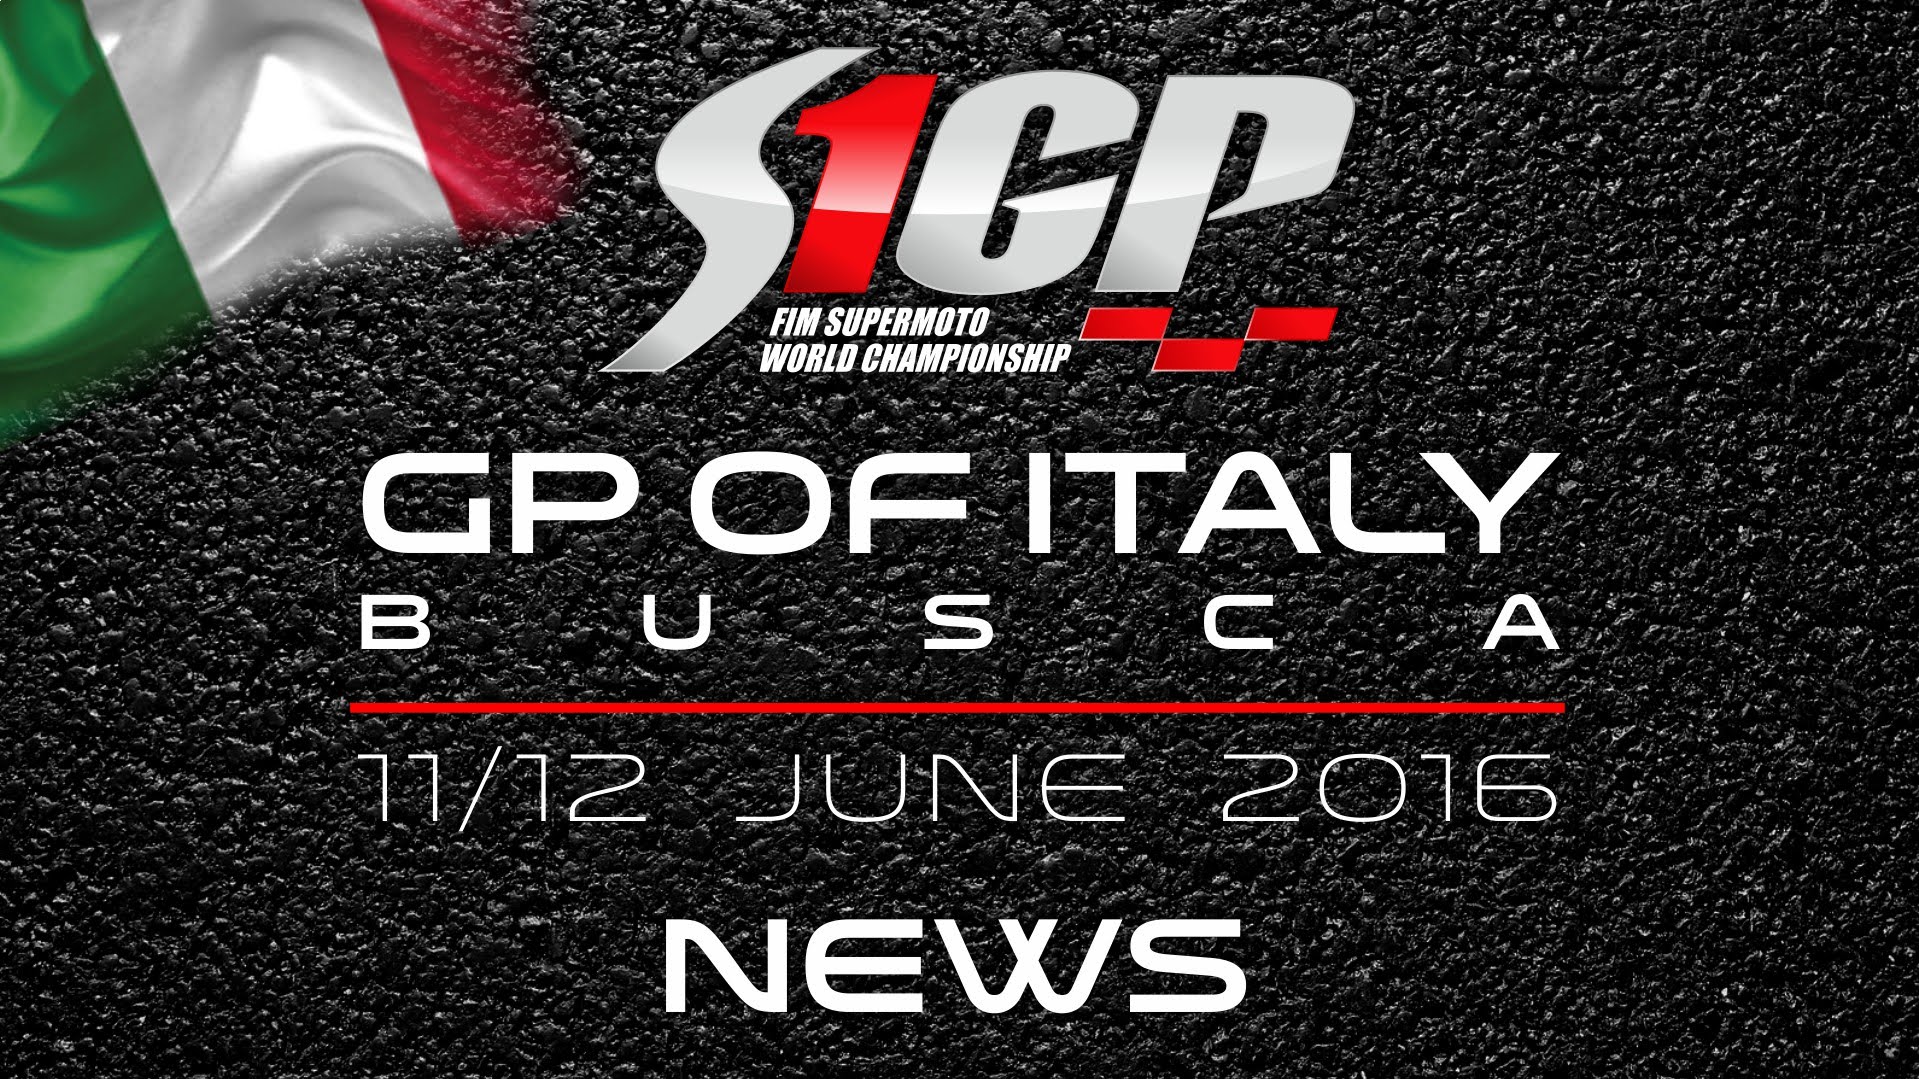 VIDEO: S1GP 2016 – ROUND 3 GP of ITALY, Busca – News Highlights (5mn) – Supermoto